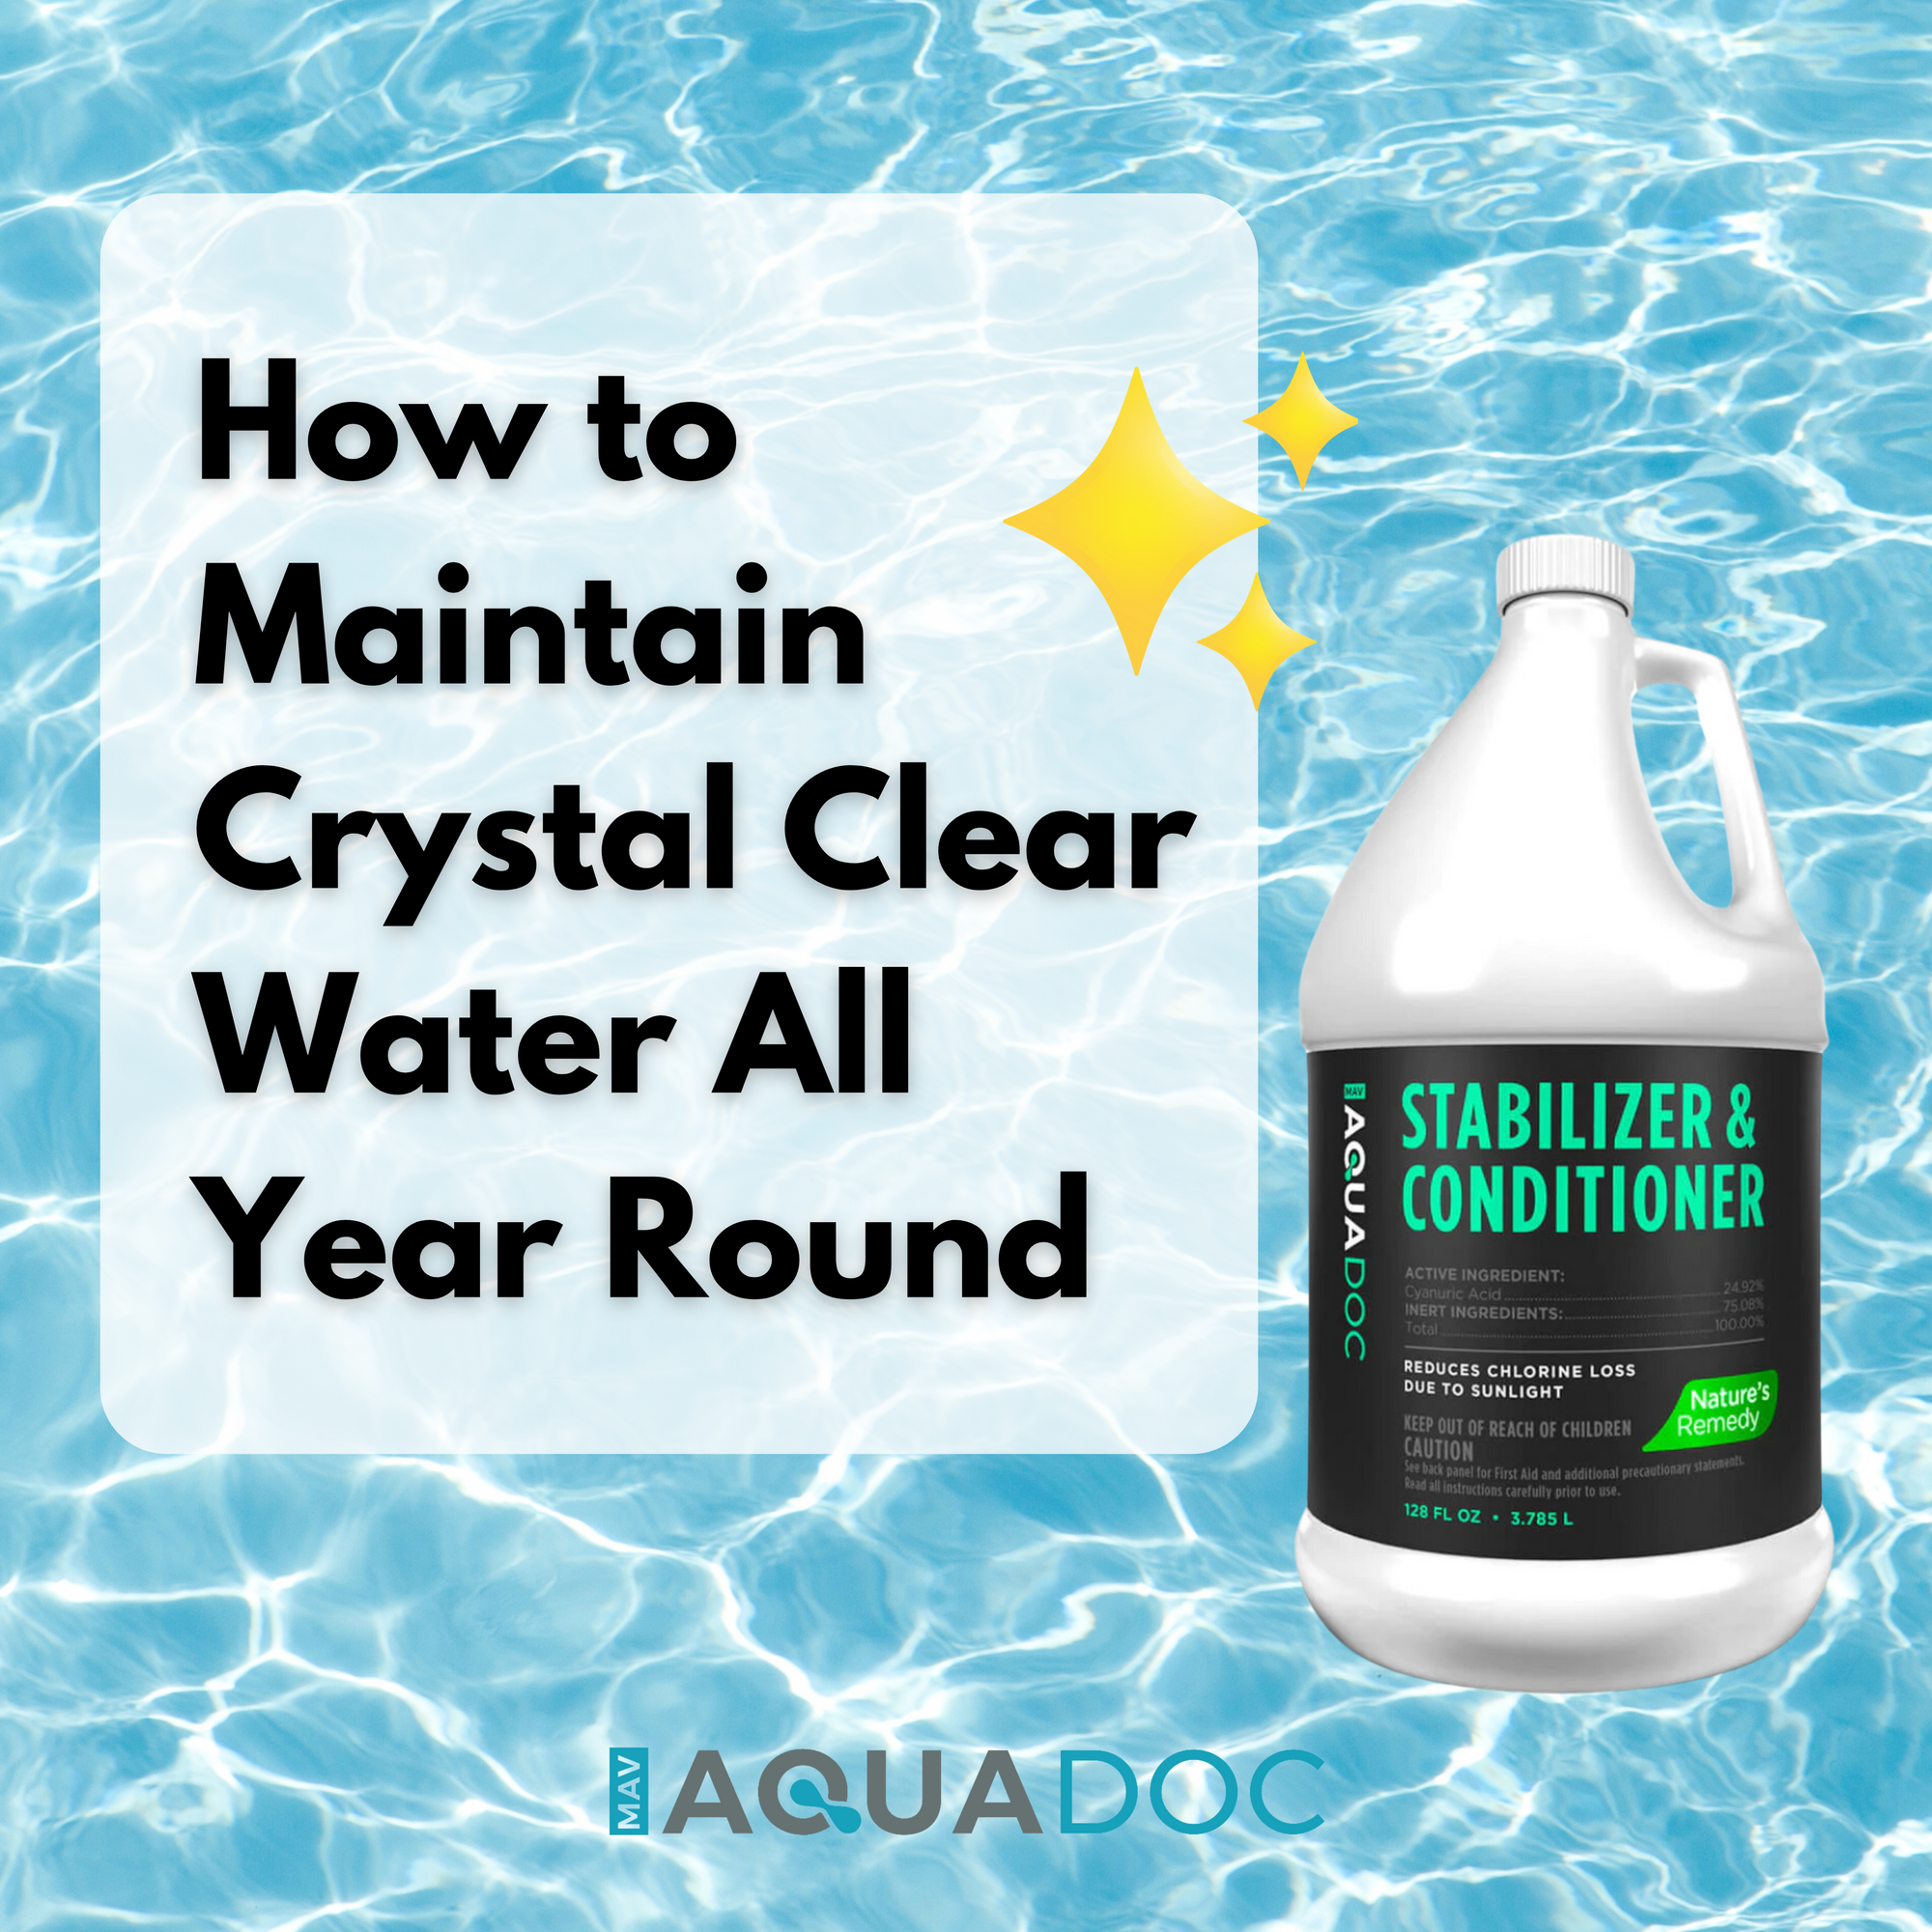 Pool stabilizer keeping chlorine active and fighting algae in a vibrant blue pool.